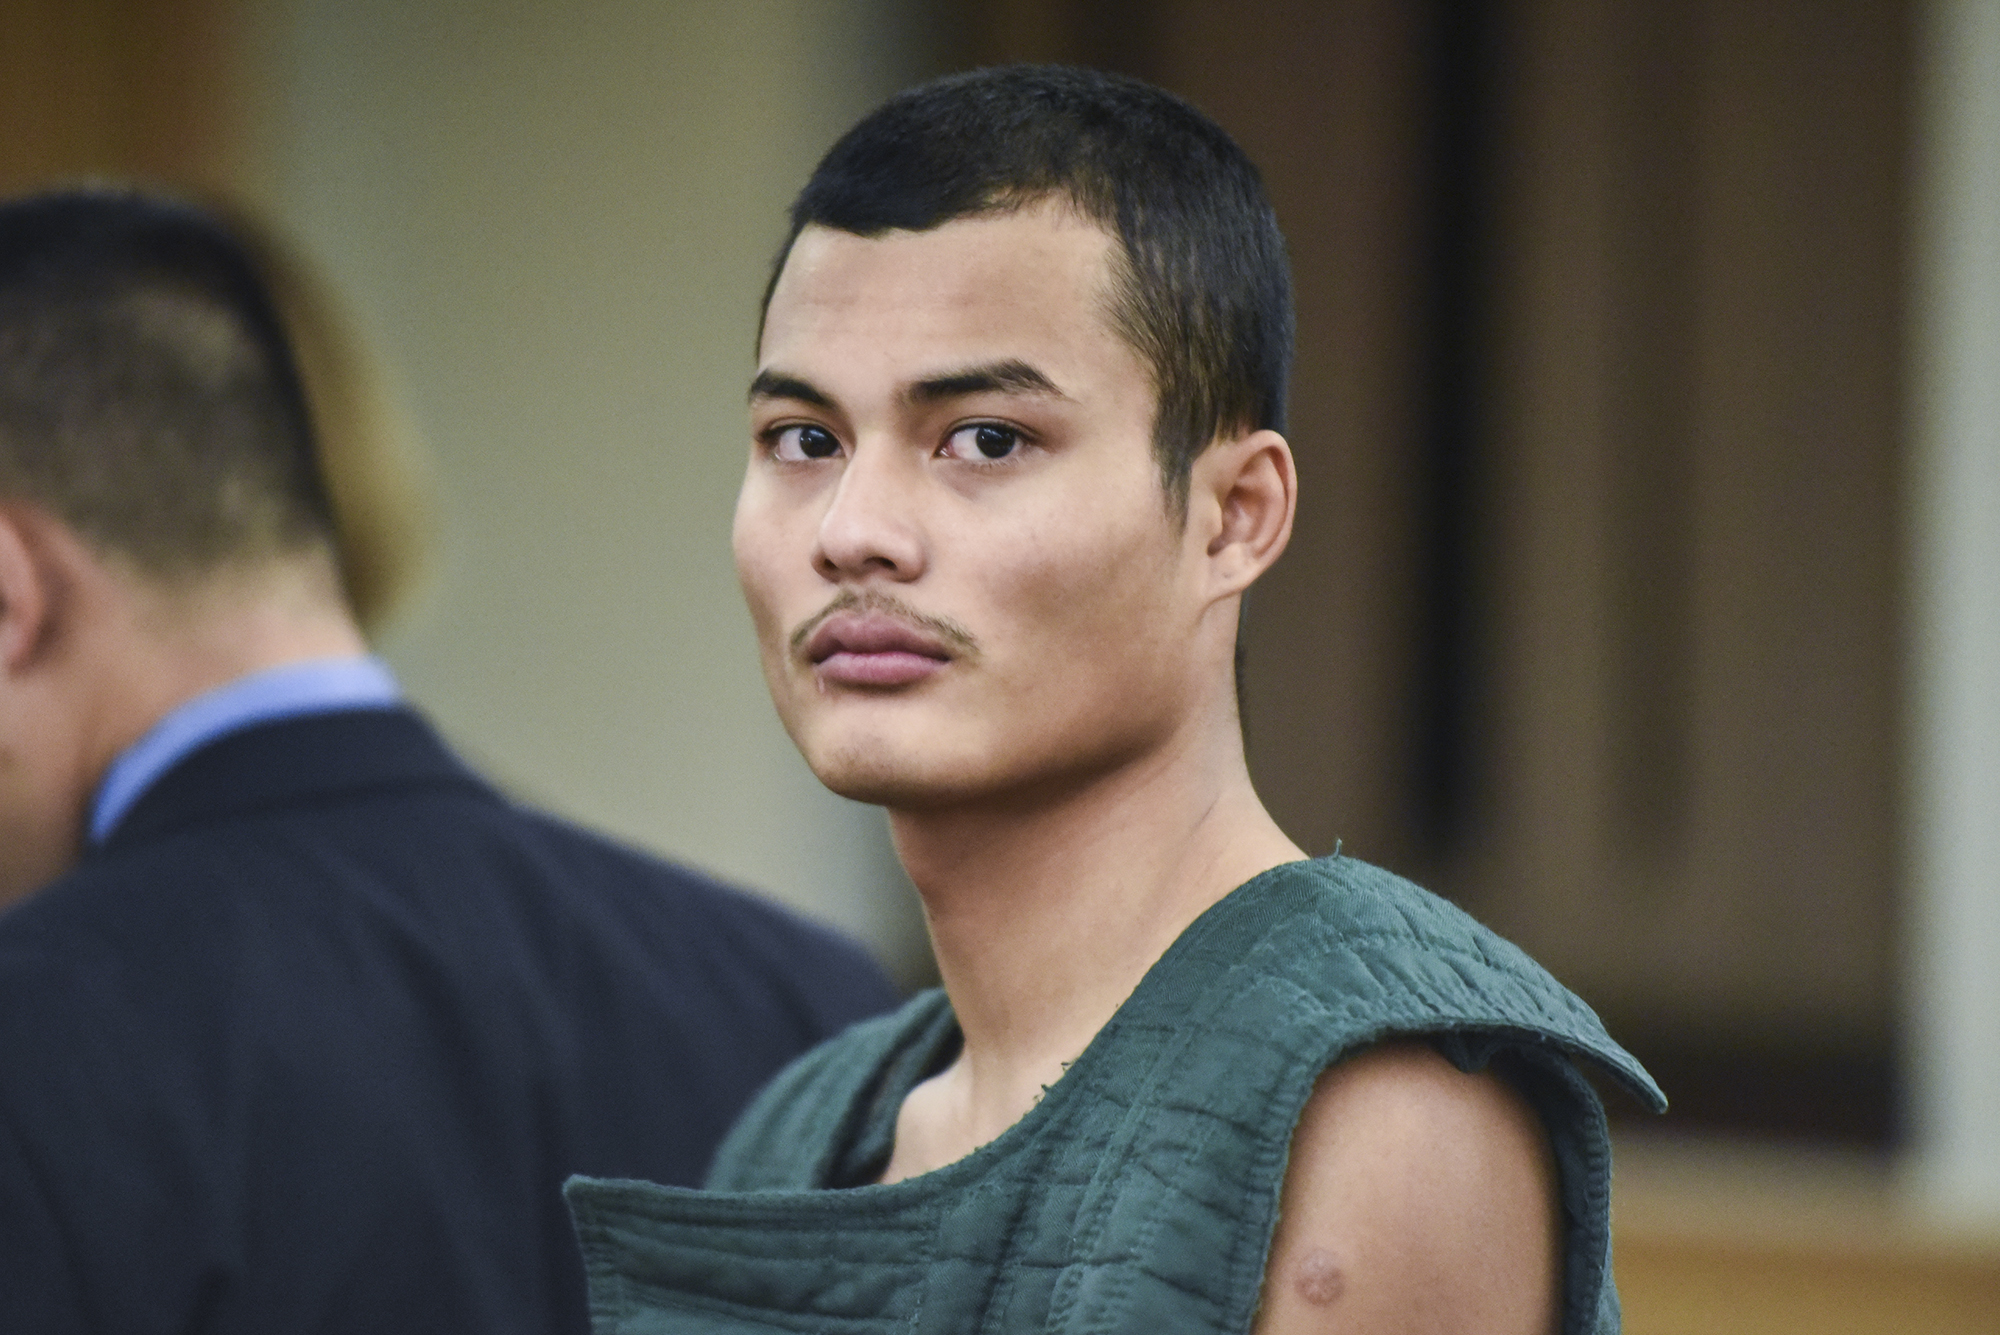 Mitchell Heng, 21, of Vancouver made a first appearance in the Clark County Superior Court on allegations of murder, robbery and arson in connection with the Oasis Market fire, Friday January 20, 2017.